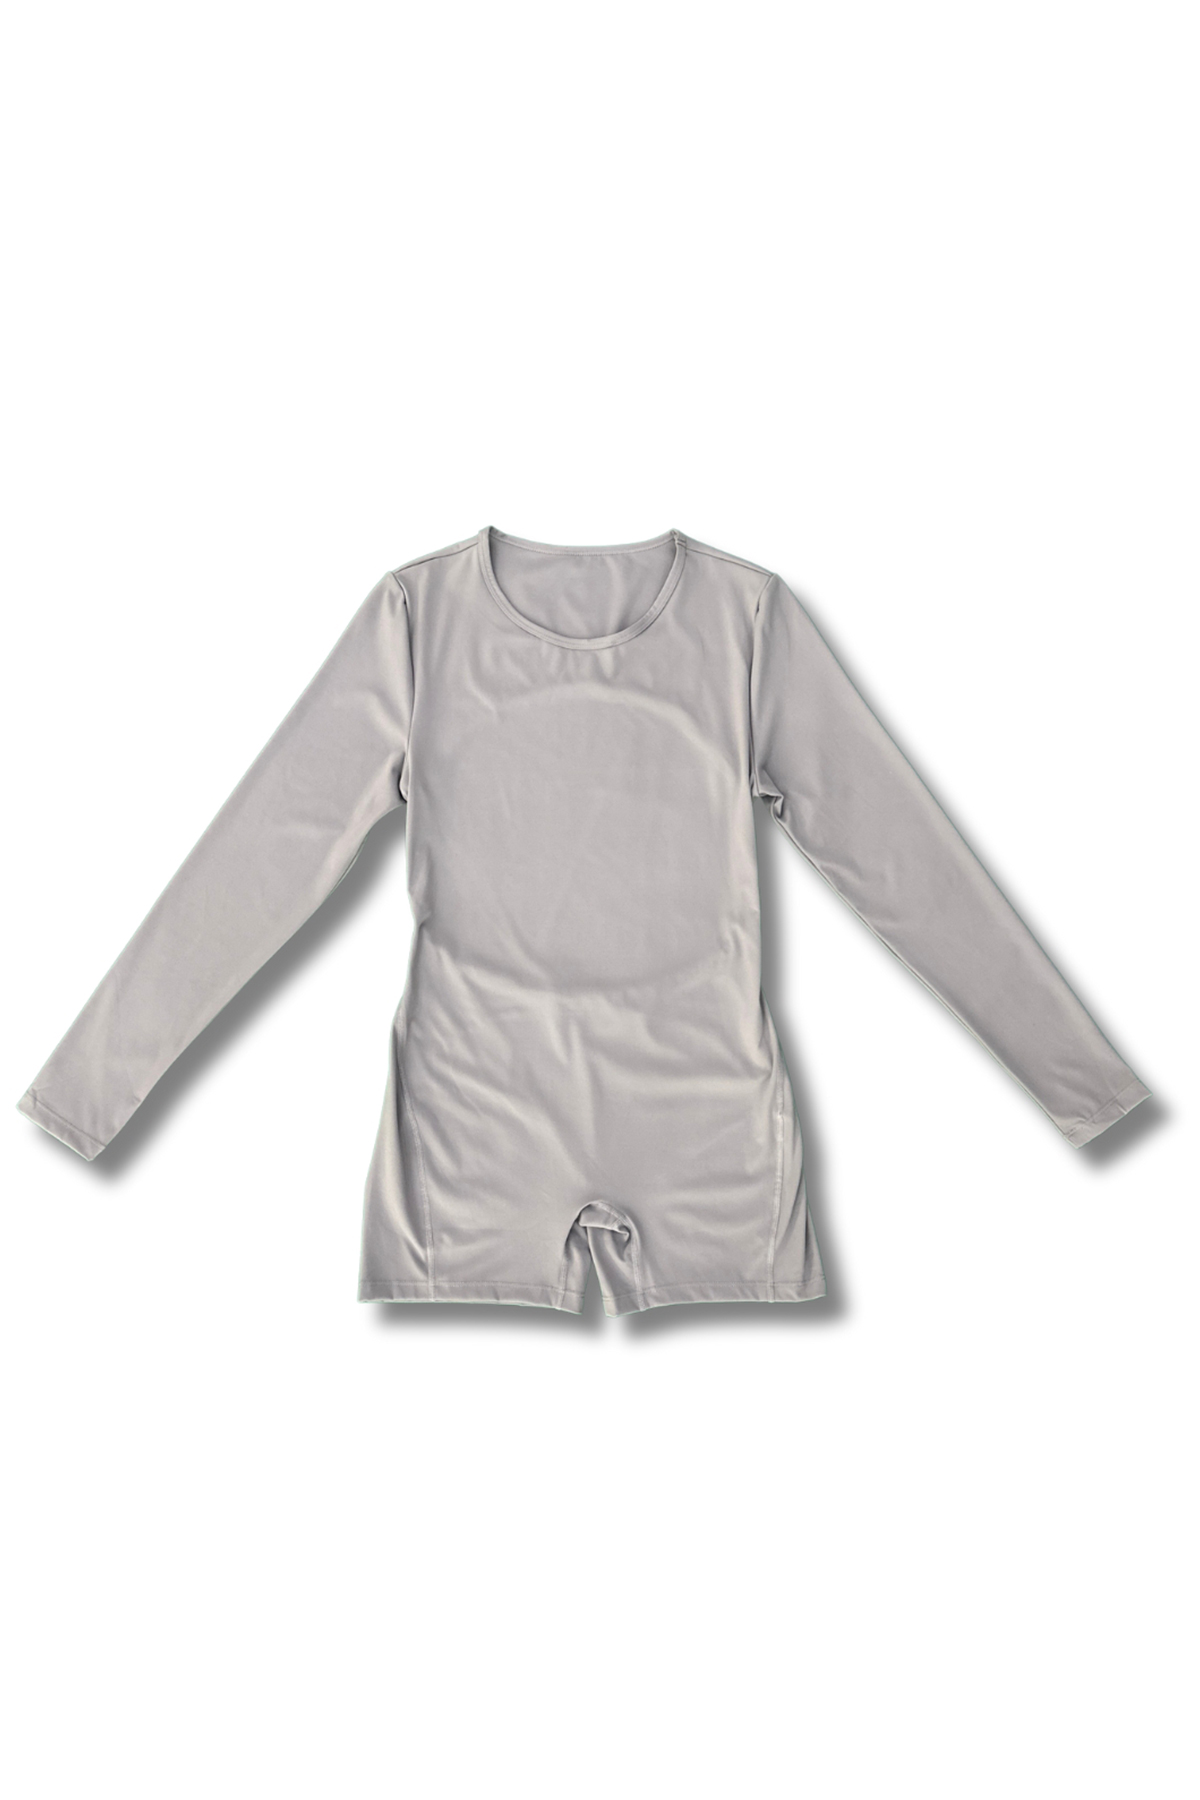 Fitted-Long-sleeved-Mid-Thigh-Yoga-Unitard-grey-front